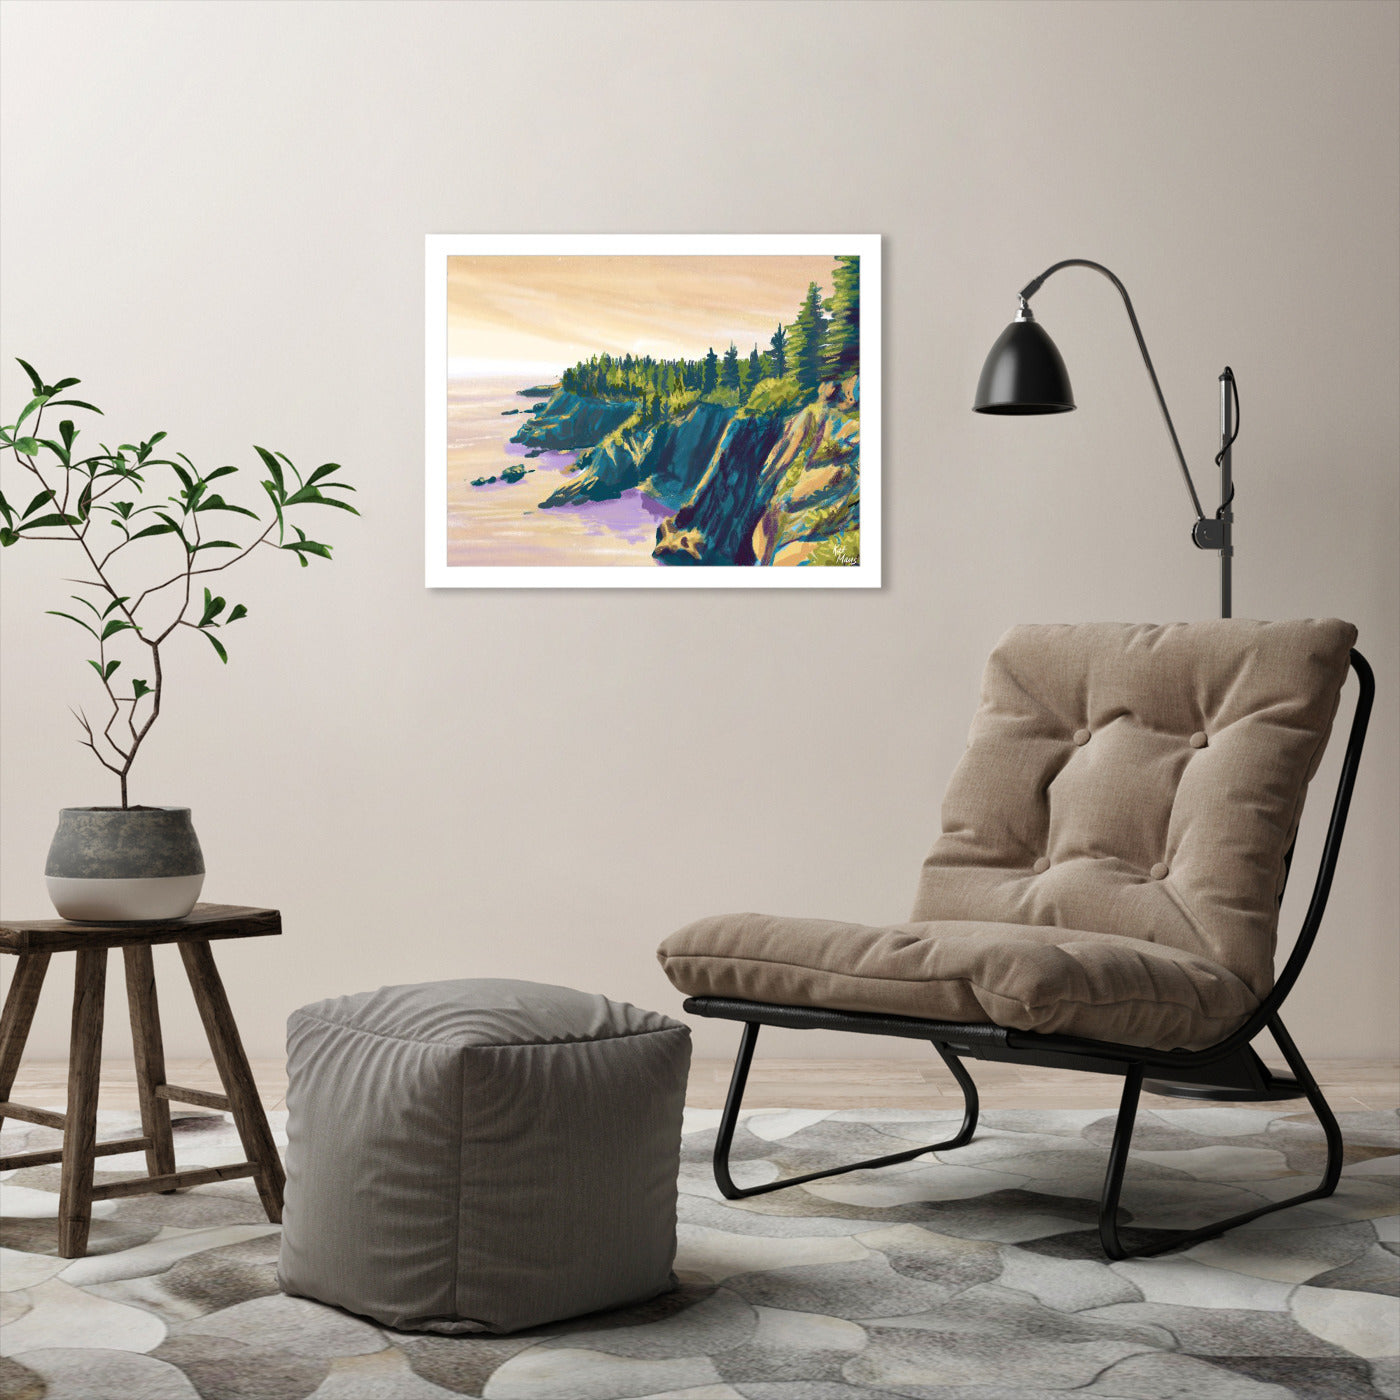 Quoddy Head State Park Me by Kat Maus  - Framed Print